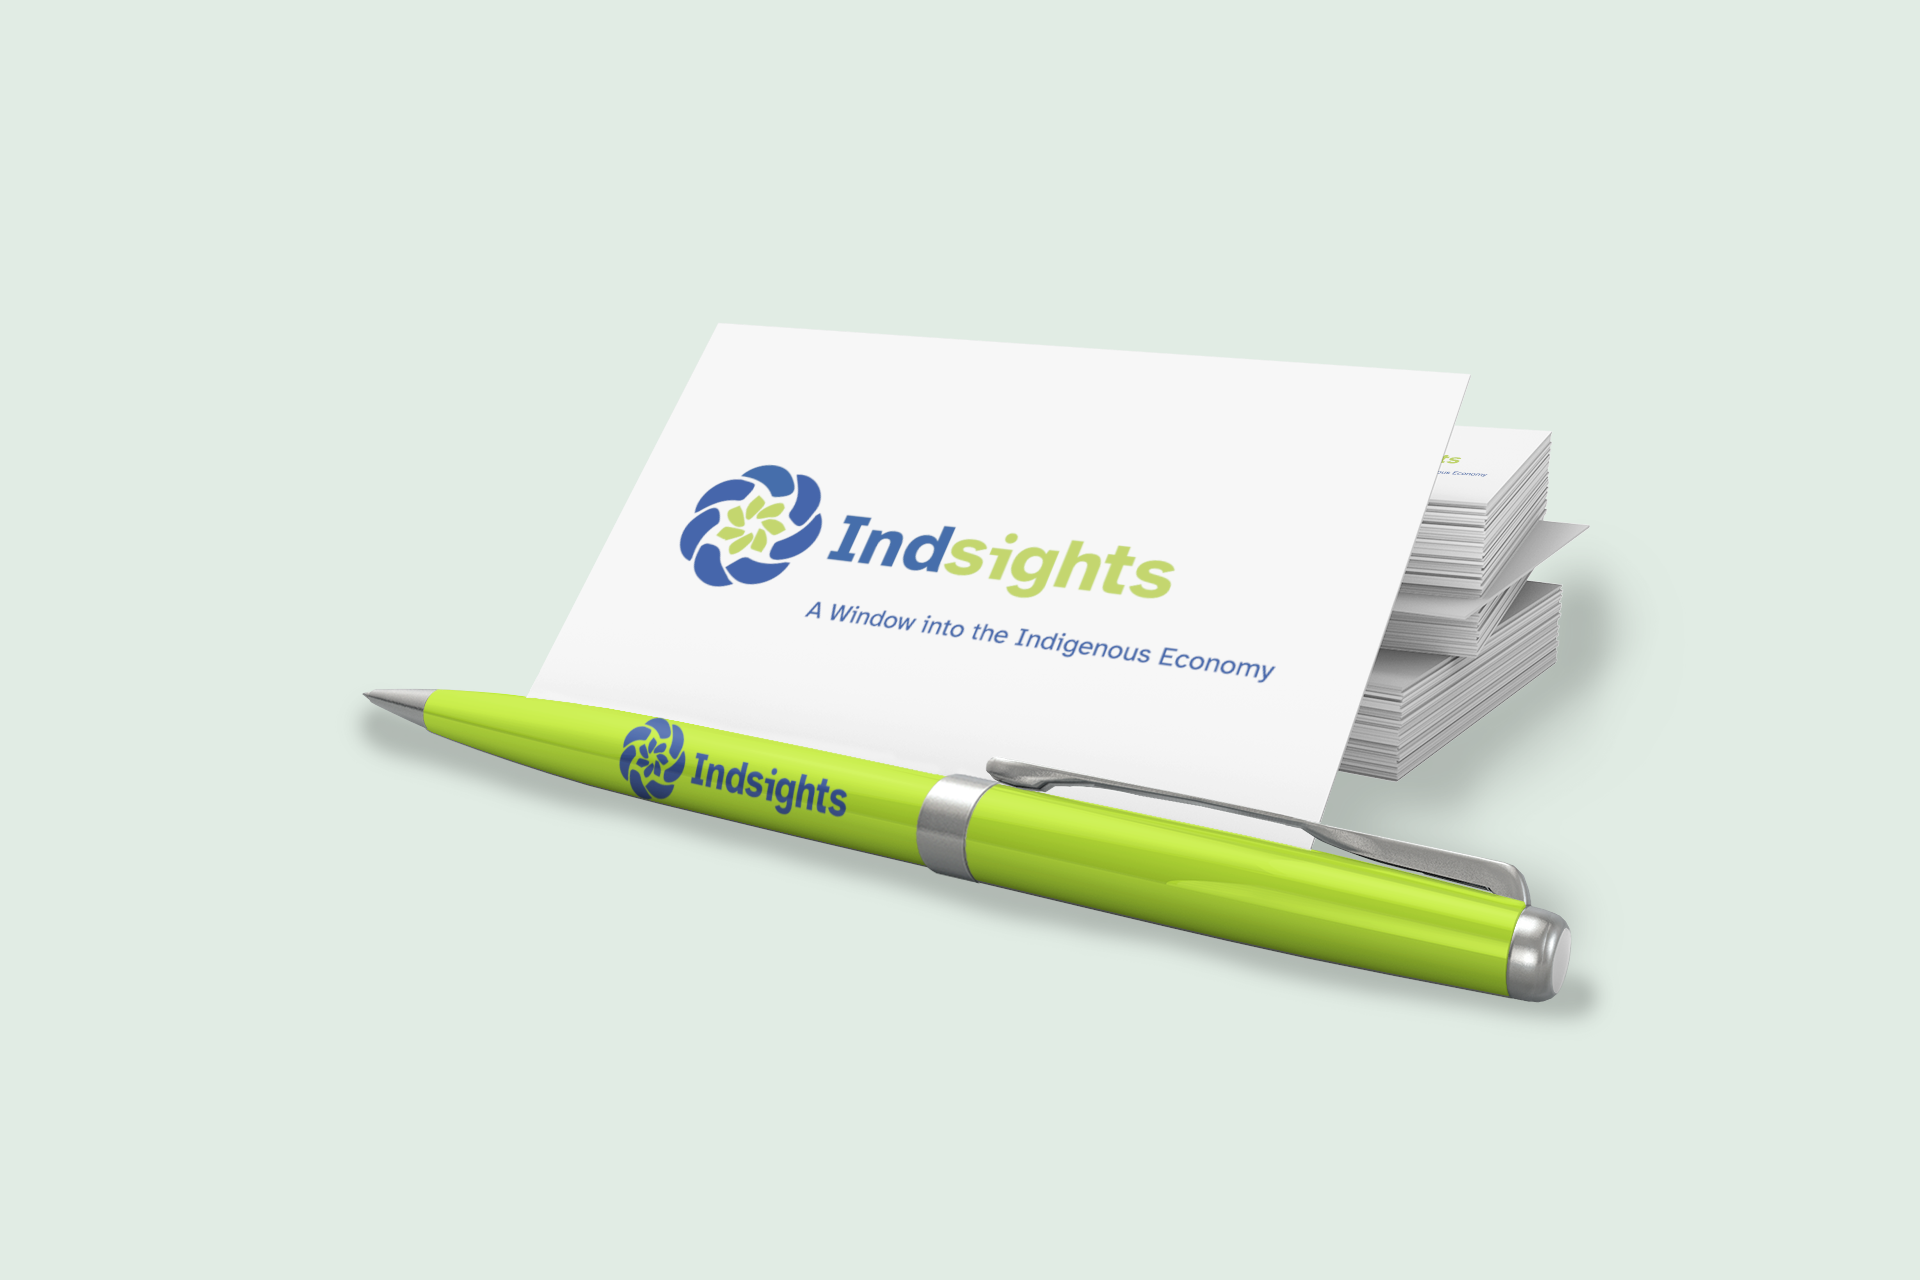 mockup-of-a-business-card-and-a-pen-in-a-minimalistic-setting-922-el.png